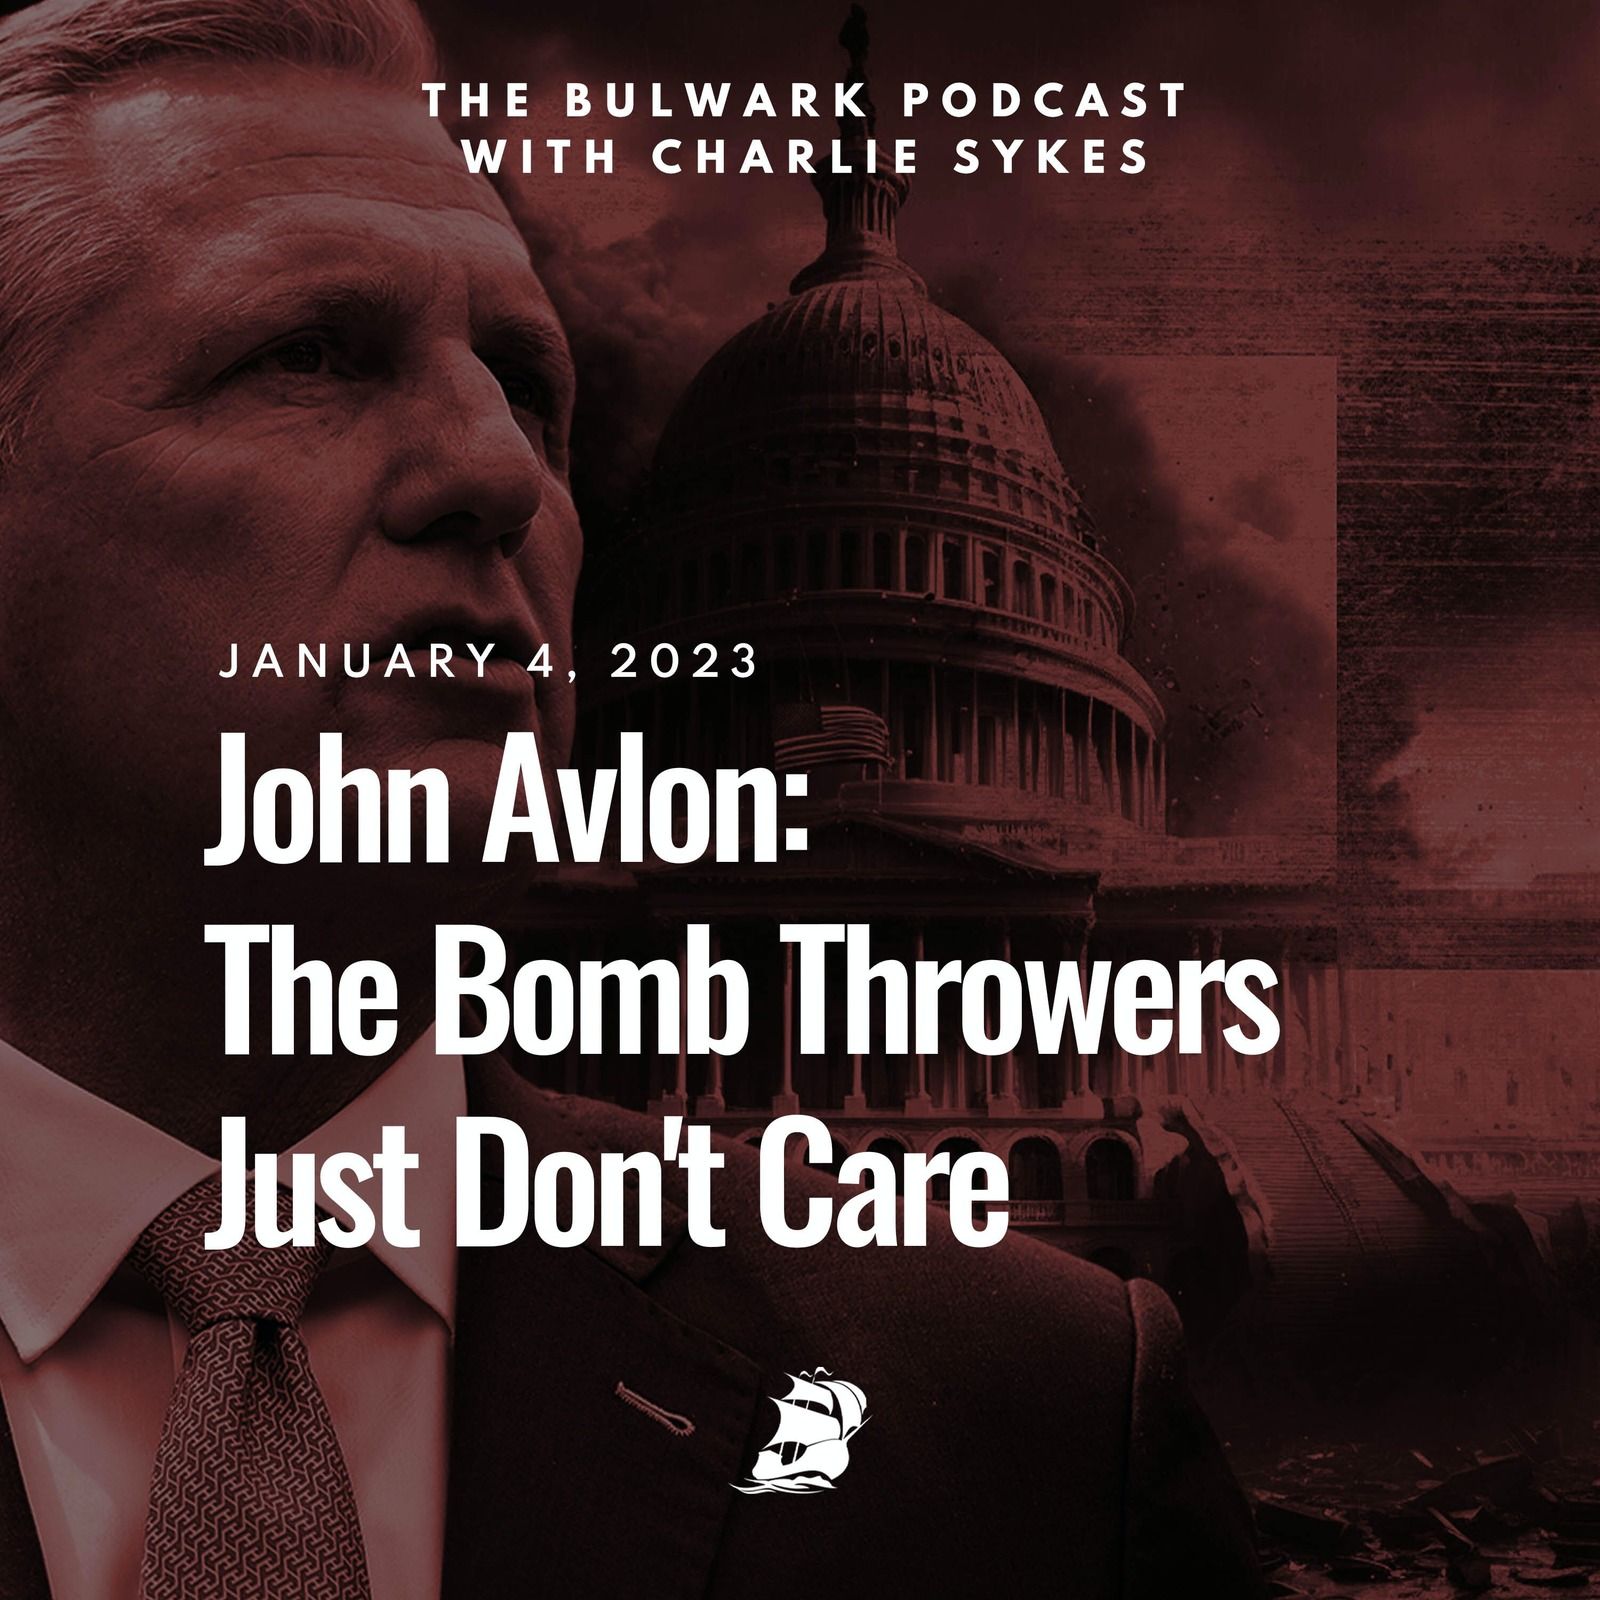 John Avlon: The Bomb Throwers Just Don't Care by The Bulwark Podcast